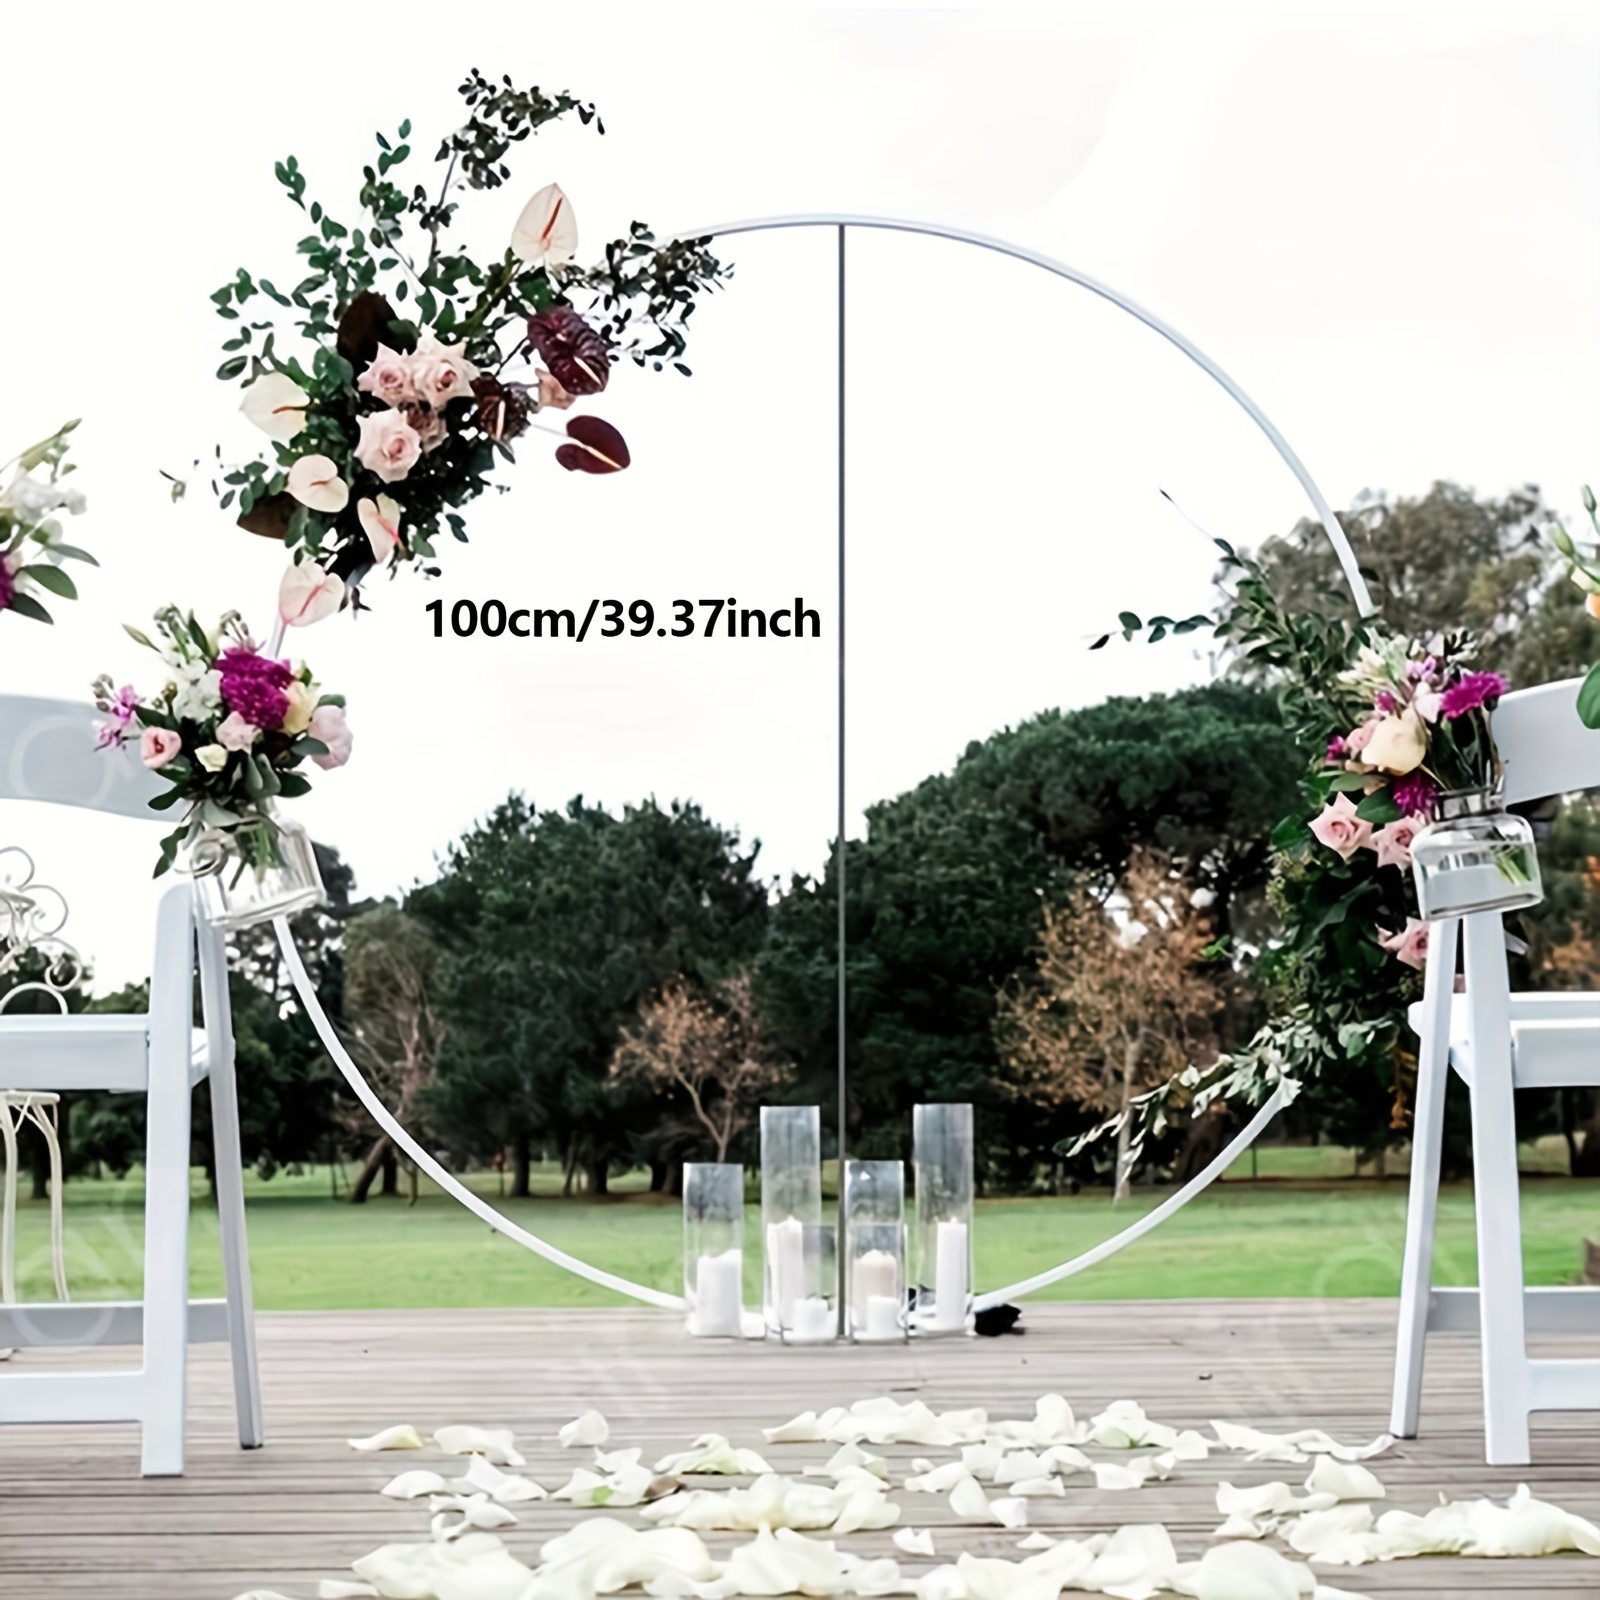 

Set, New High-quality Plastic Balloon Arch Bracket Set, Party Decoration Set, Diy Arch, Flower Wreath Balloon Bracket Set, Multiple Specifications Available (39.37inch/59.05inch/70.86inch)